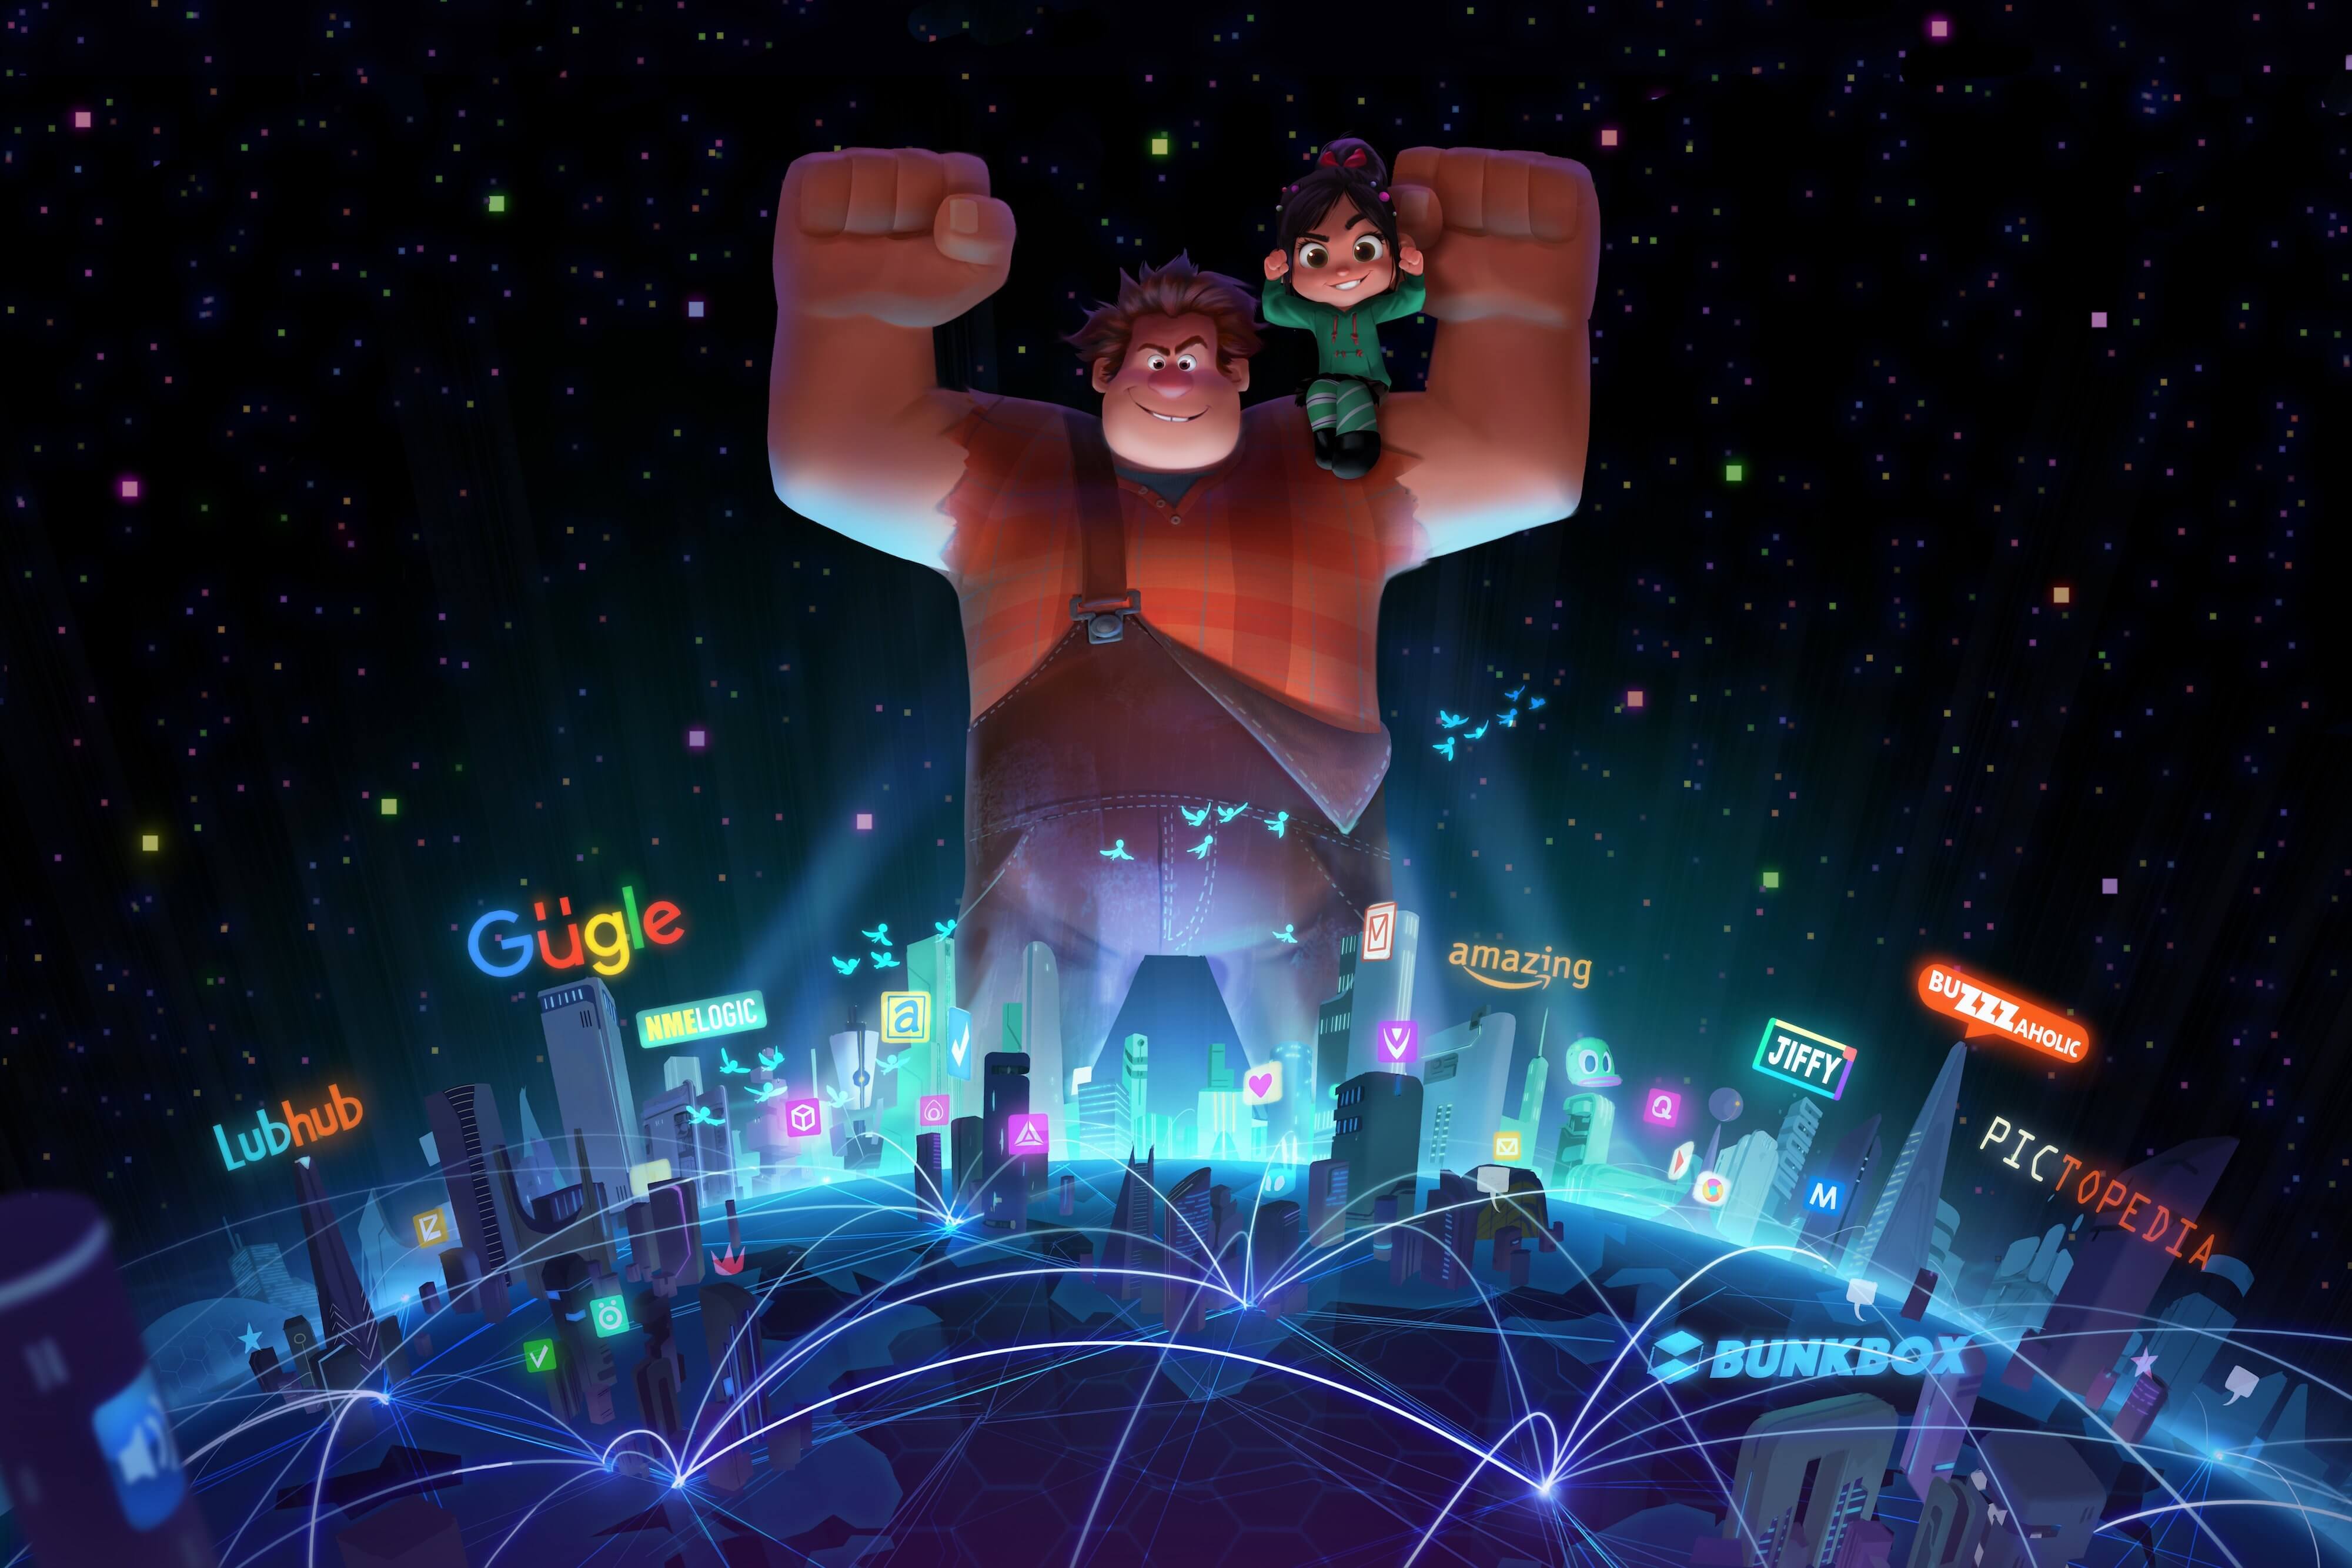 New WRECK IT RALPH 2 Details From The D23 Expo!